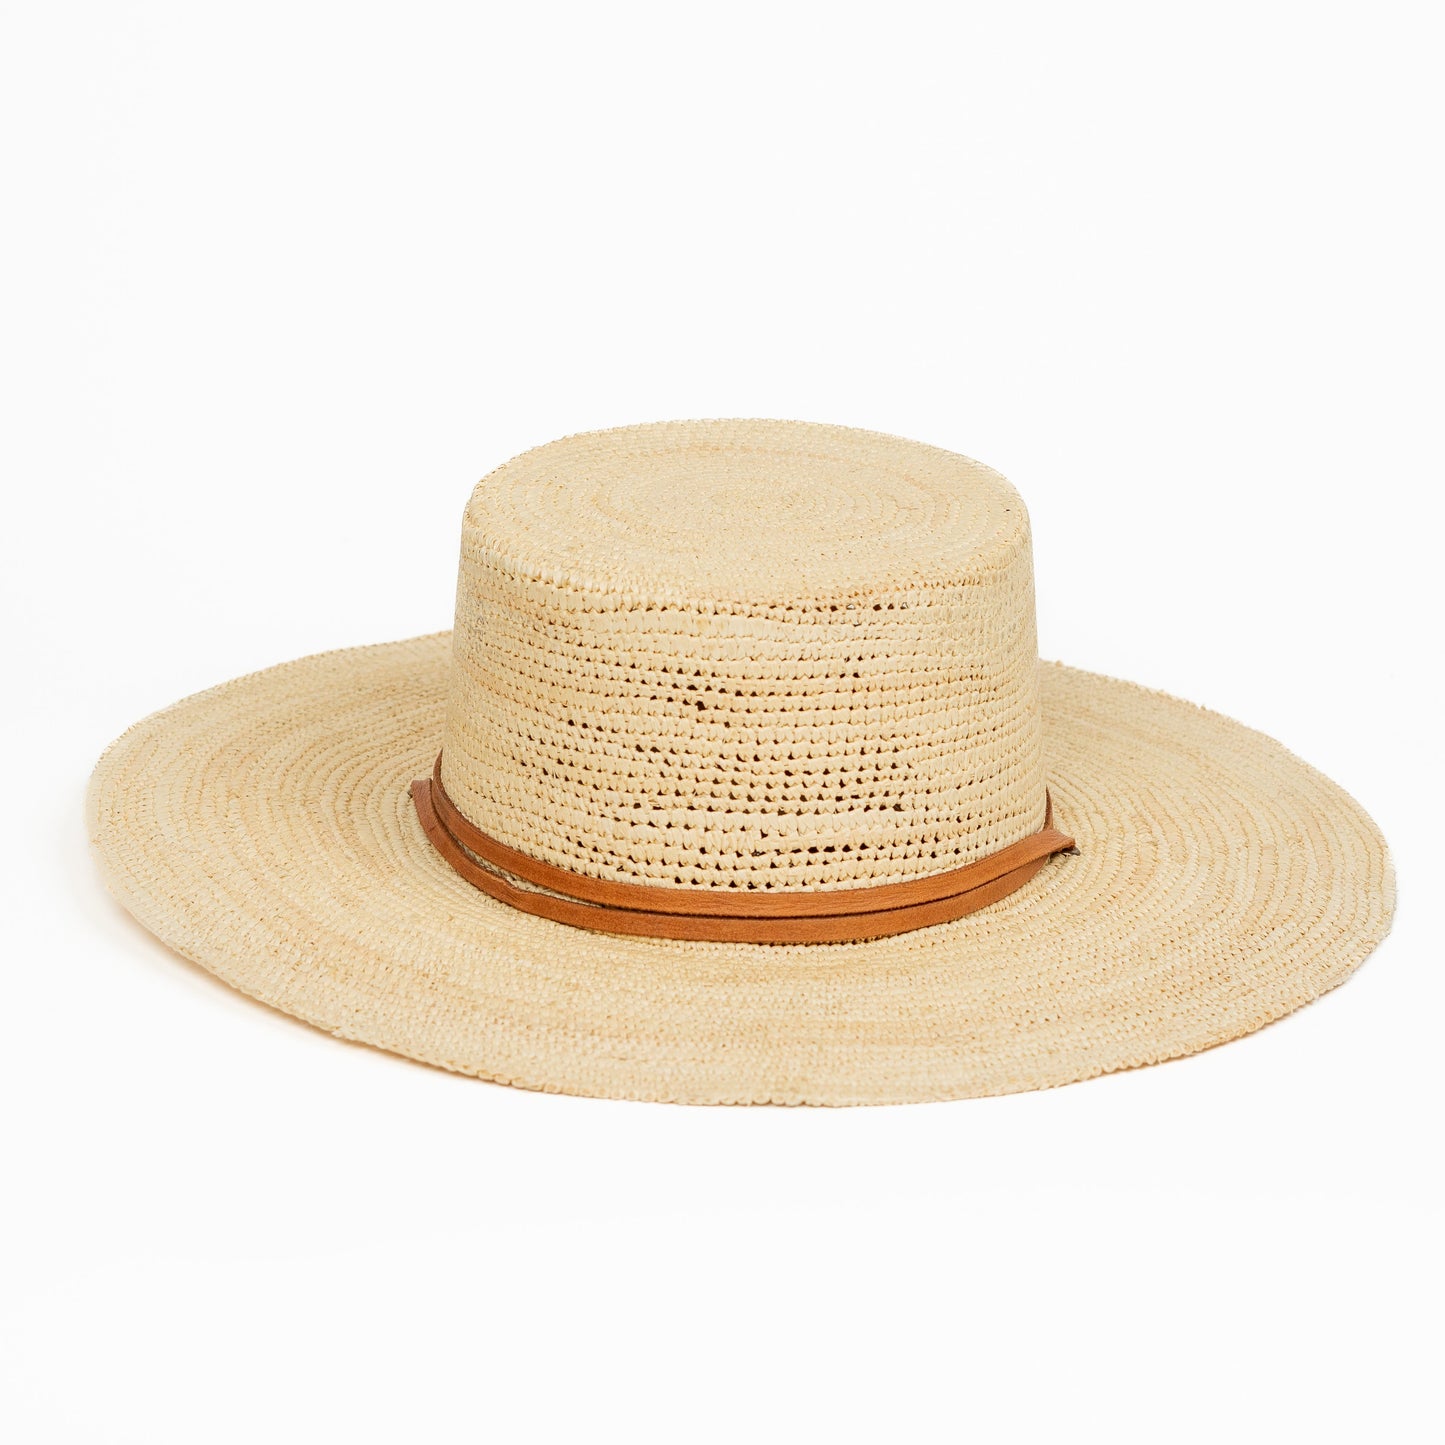 Straw Boater Hat by Made by Minga